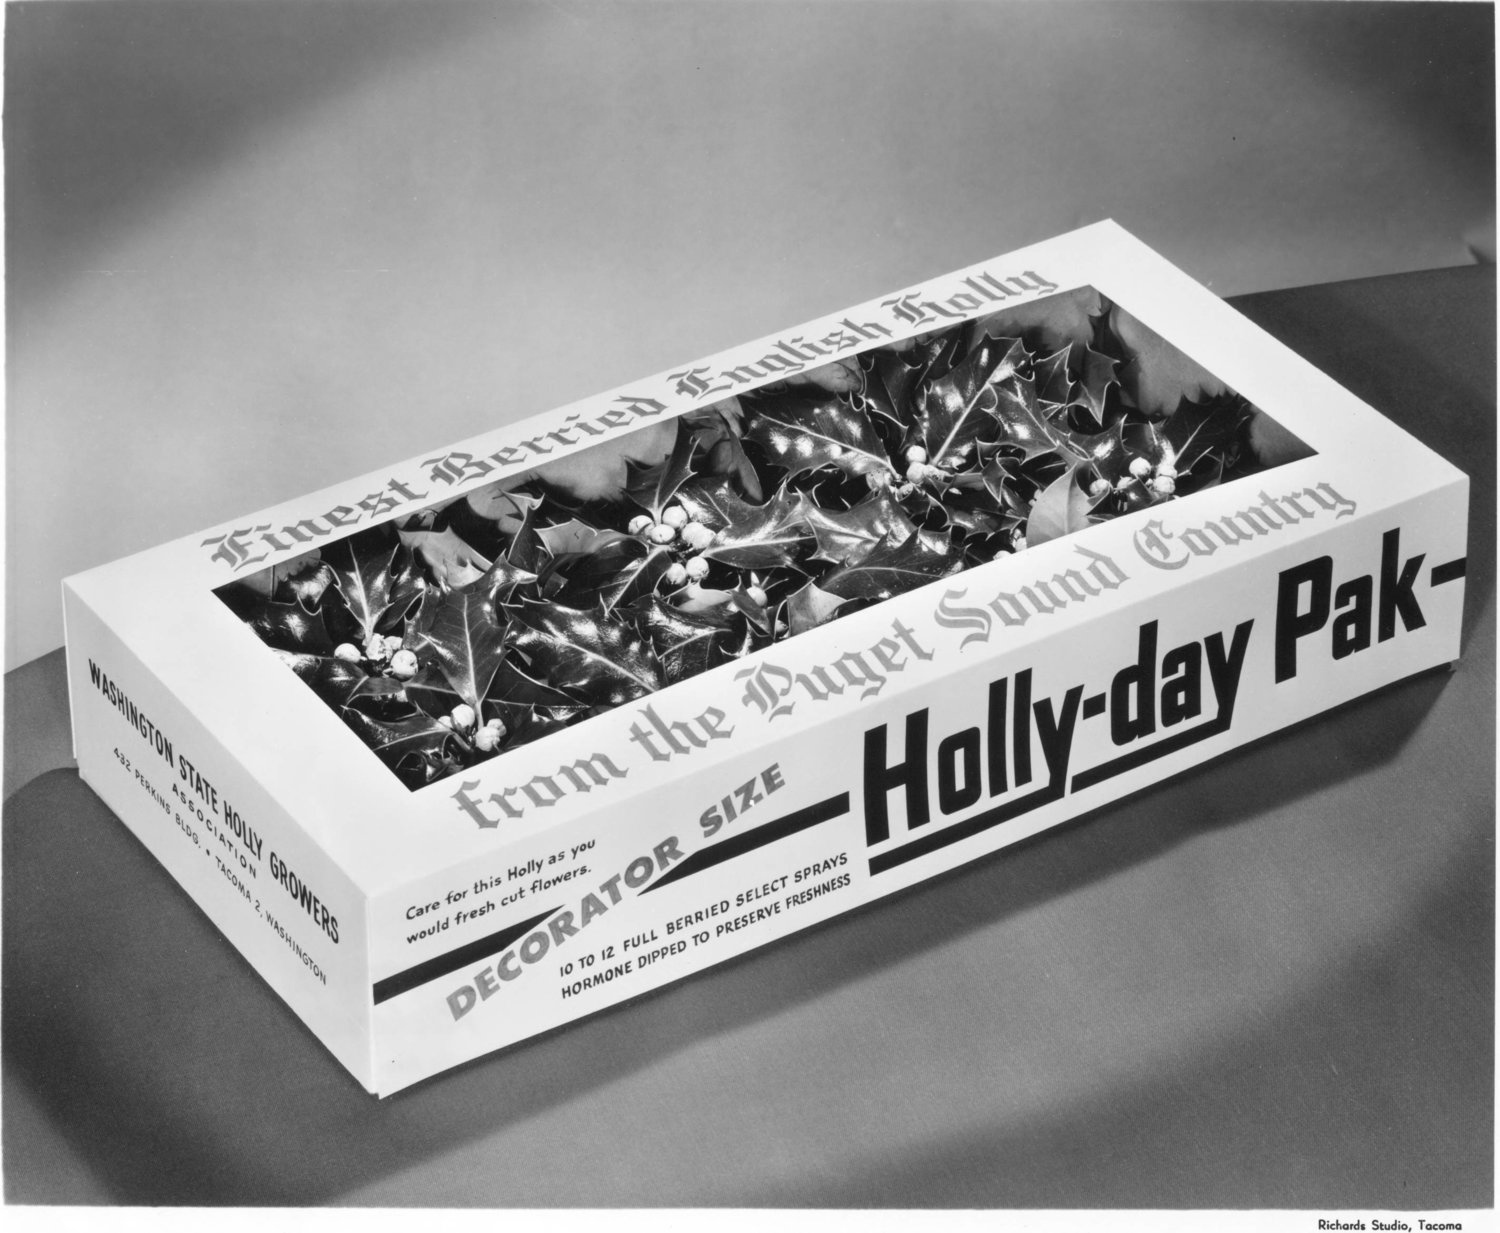 Tacoma Public Library Northwest Room, Richards Studio Holly for Christmas ad from Dec 1953